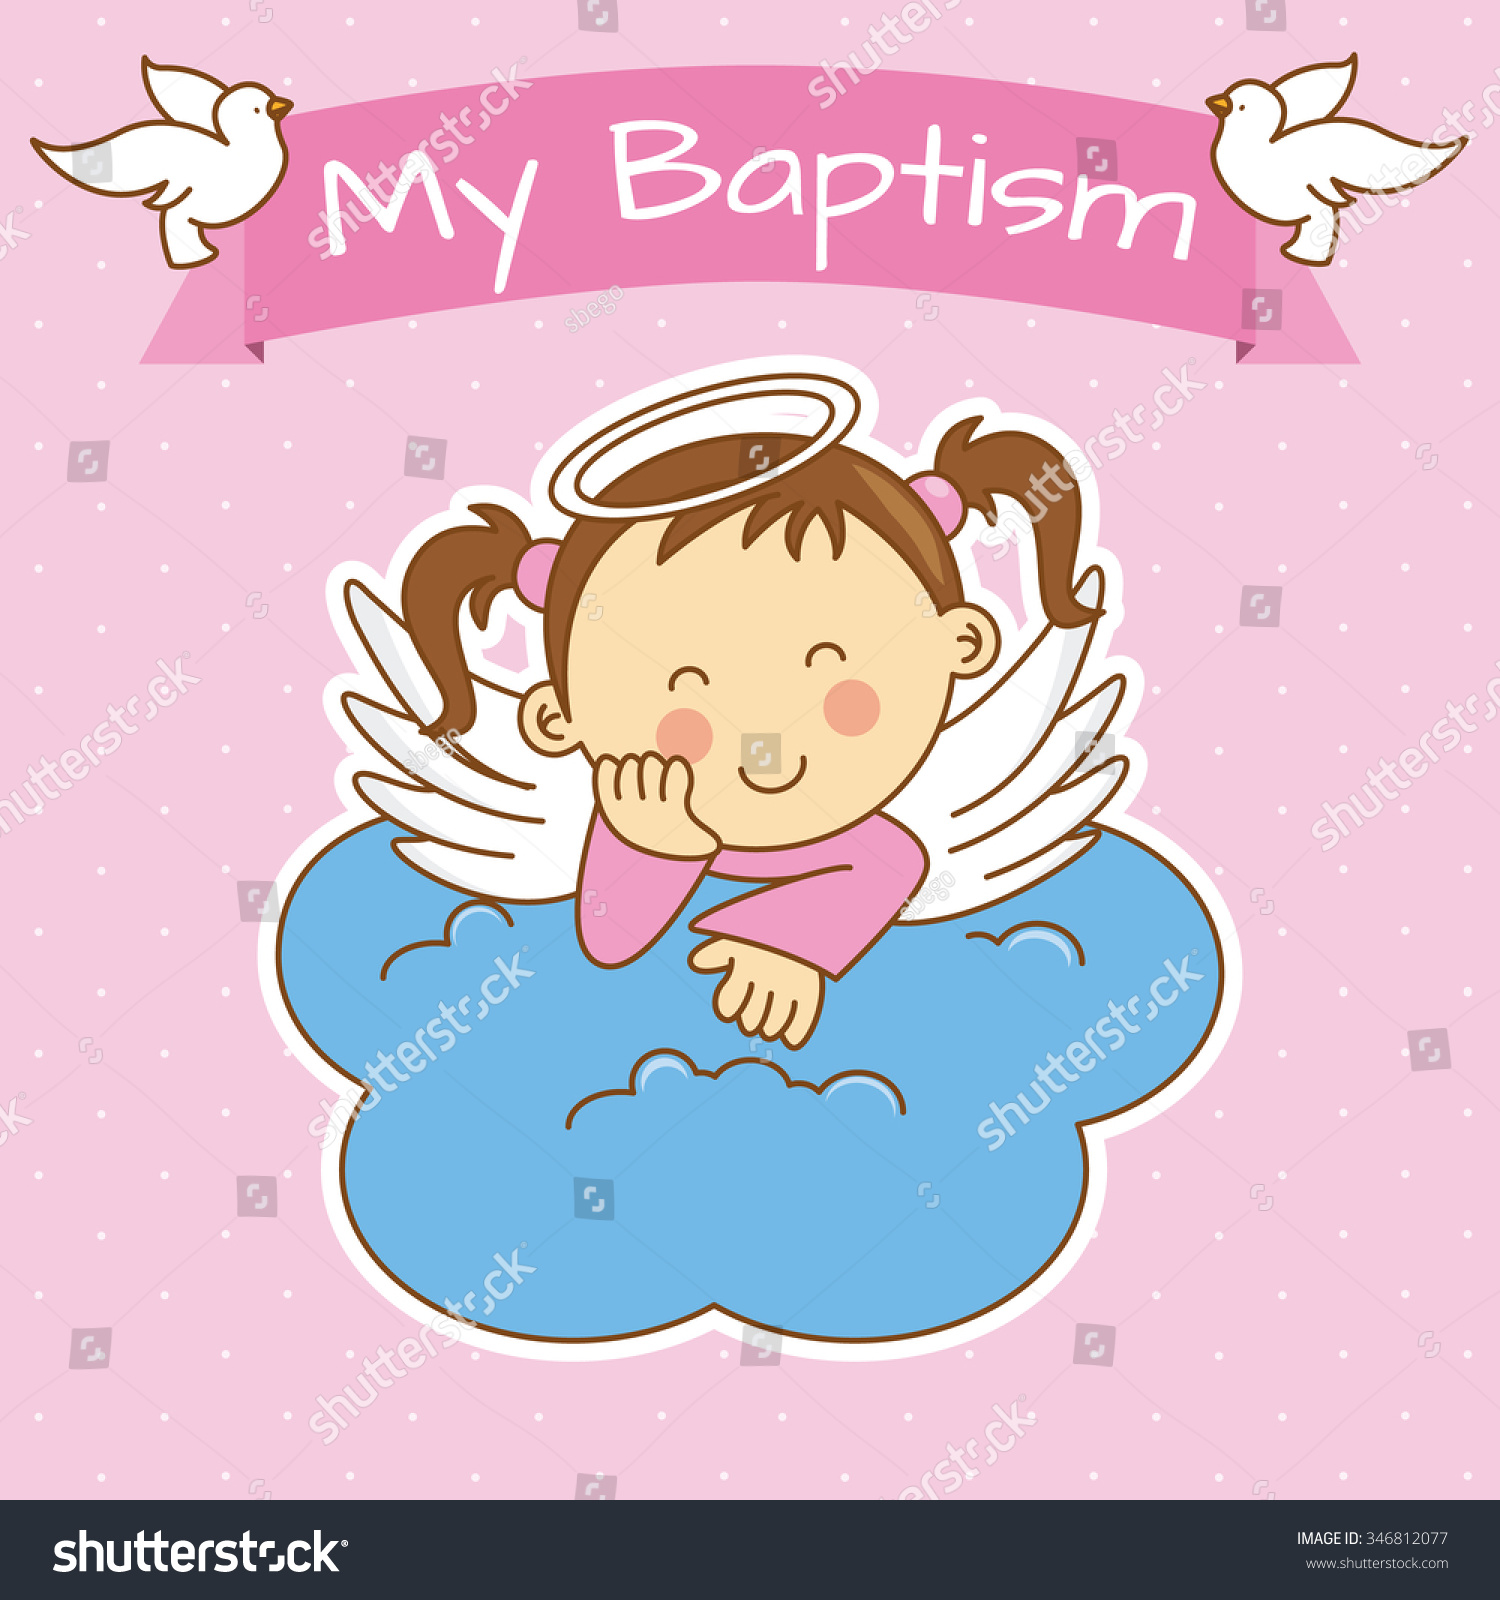 clipart christening of baby - photo #44